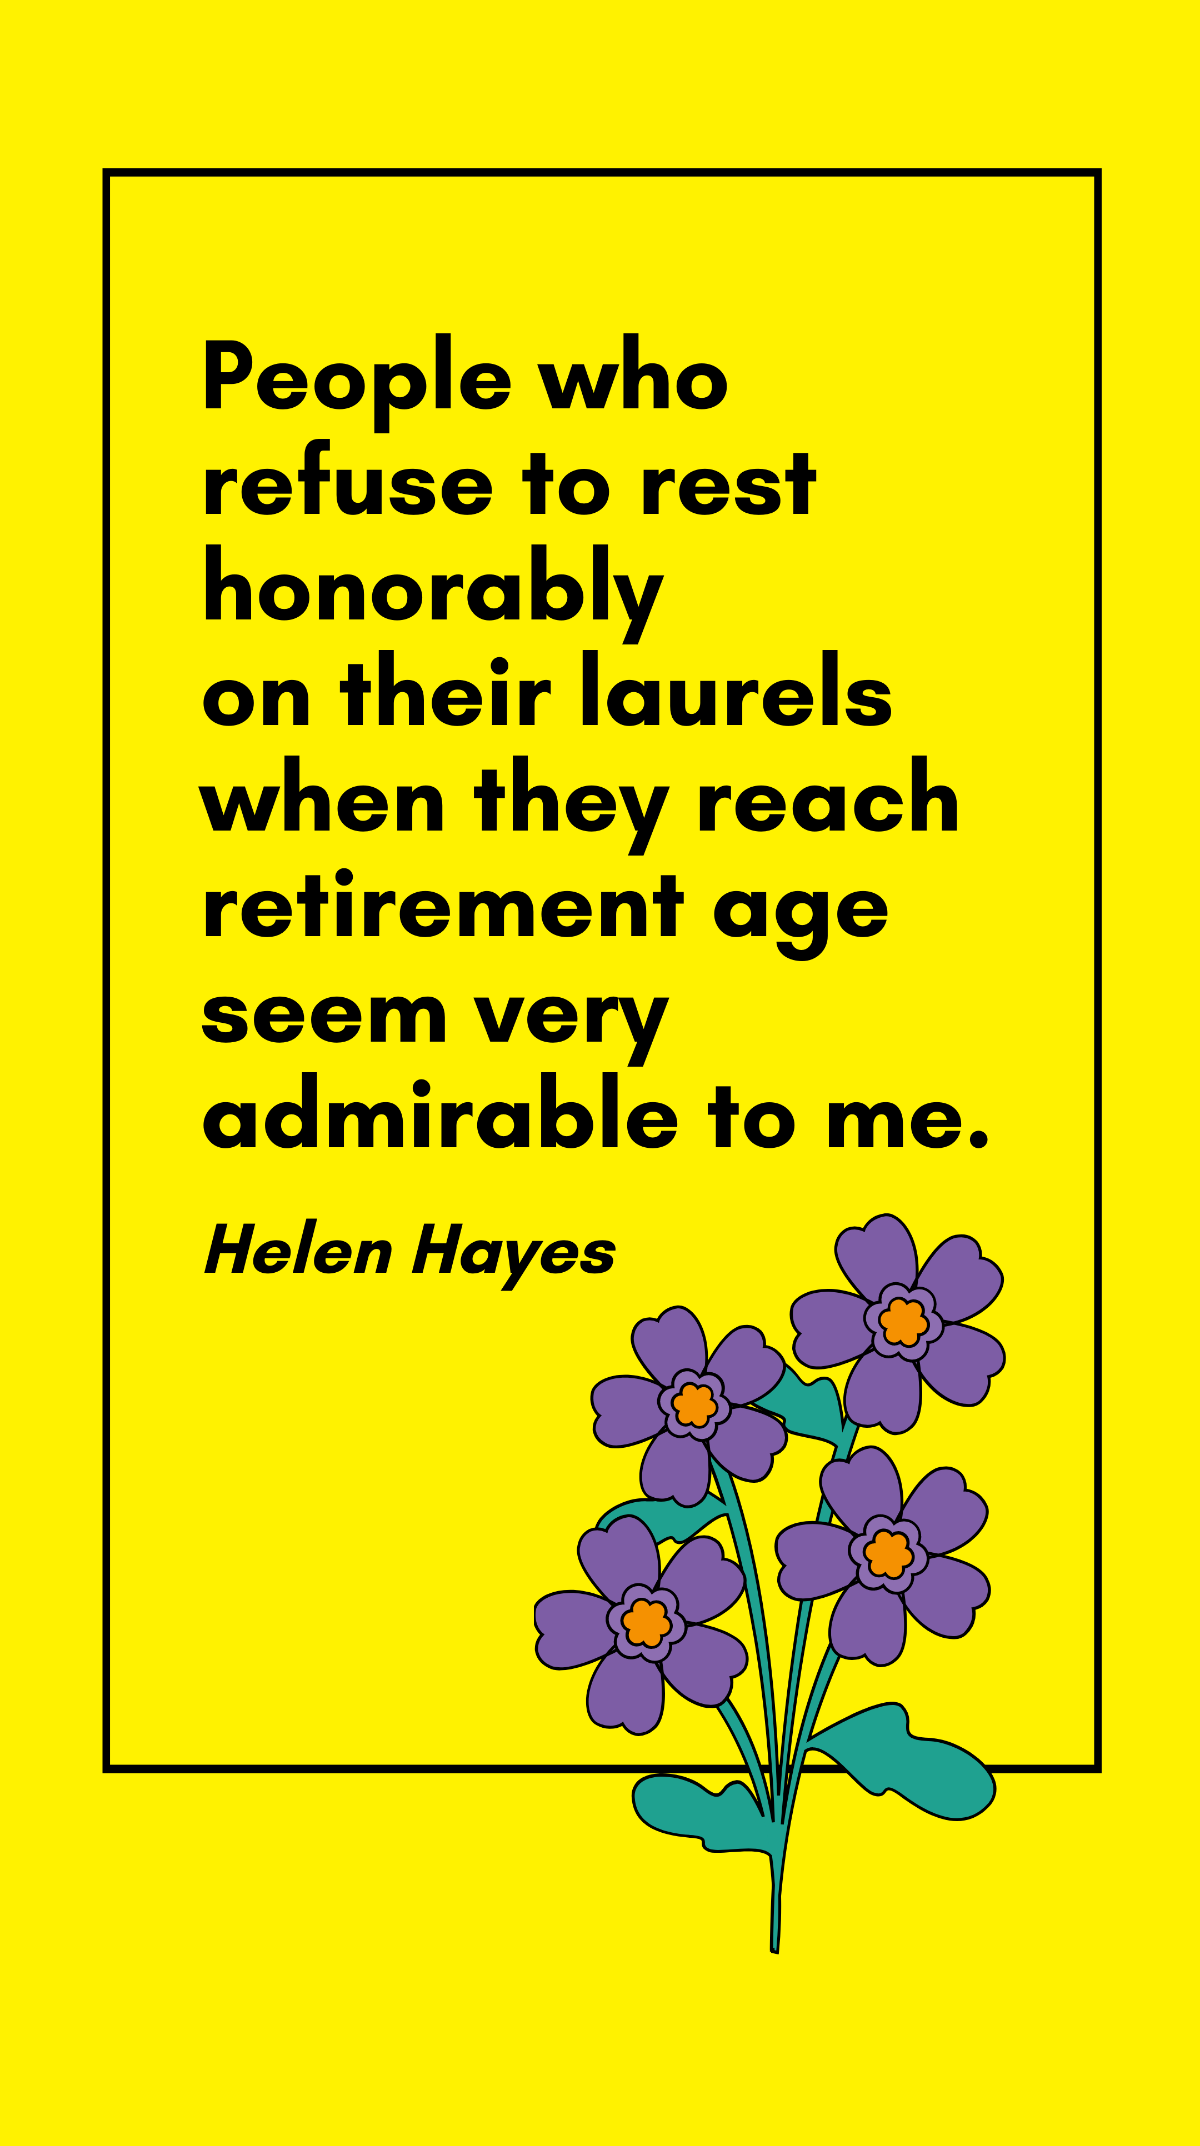 Helen Hayes - People who refuse to rest honorably on their laurels when ...